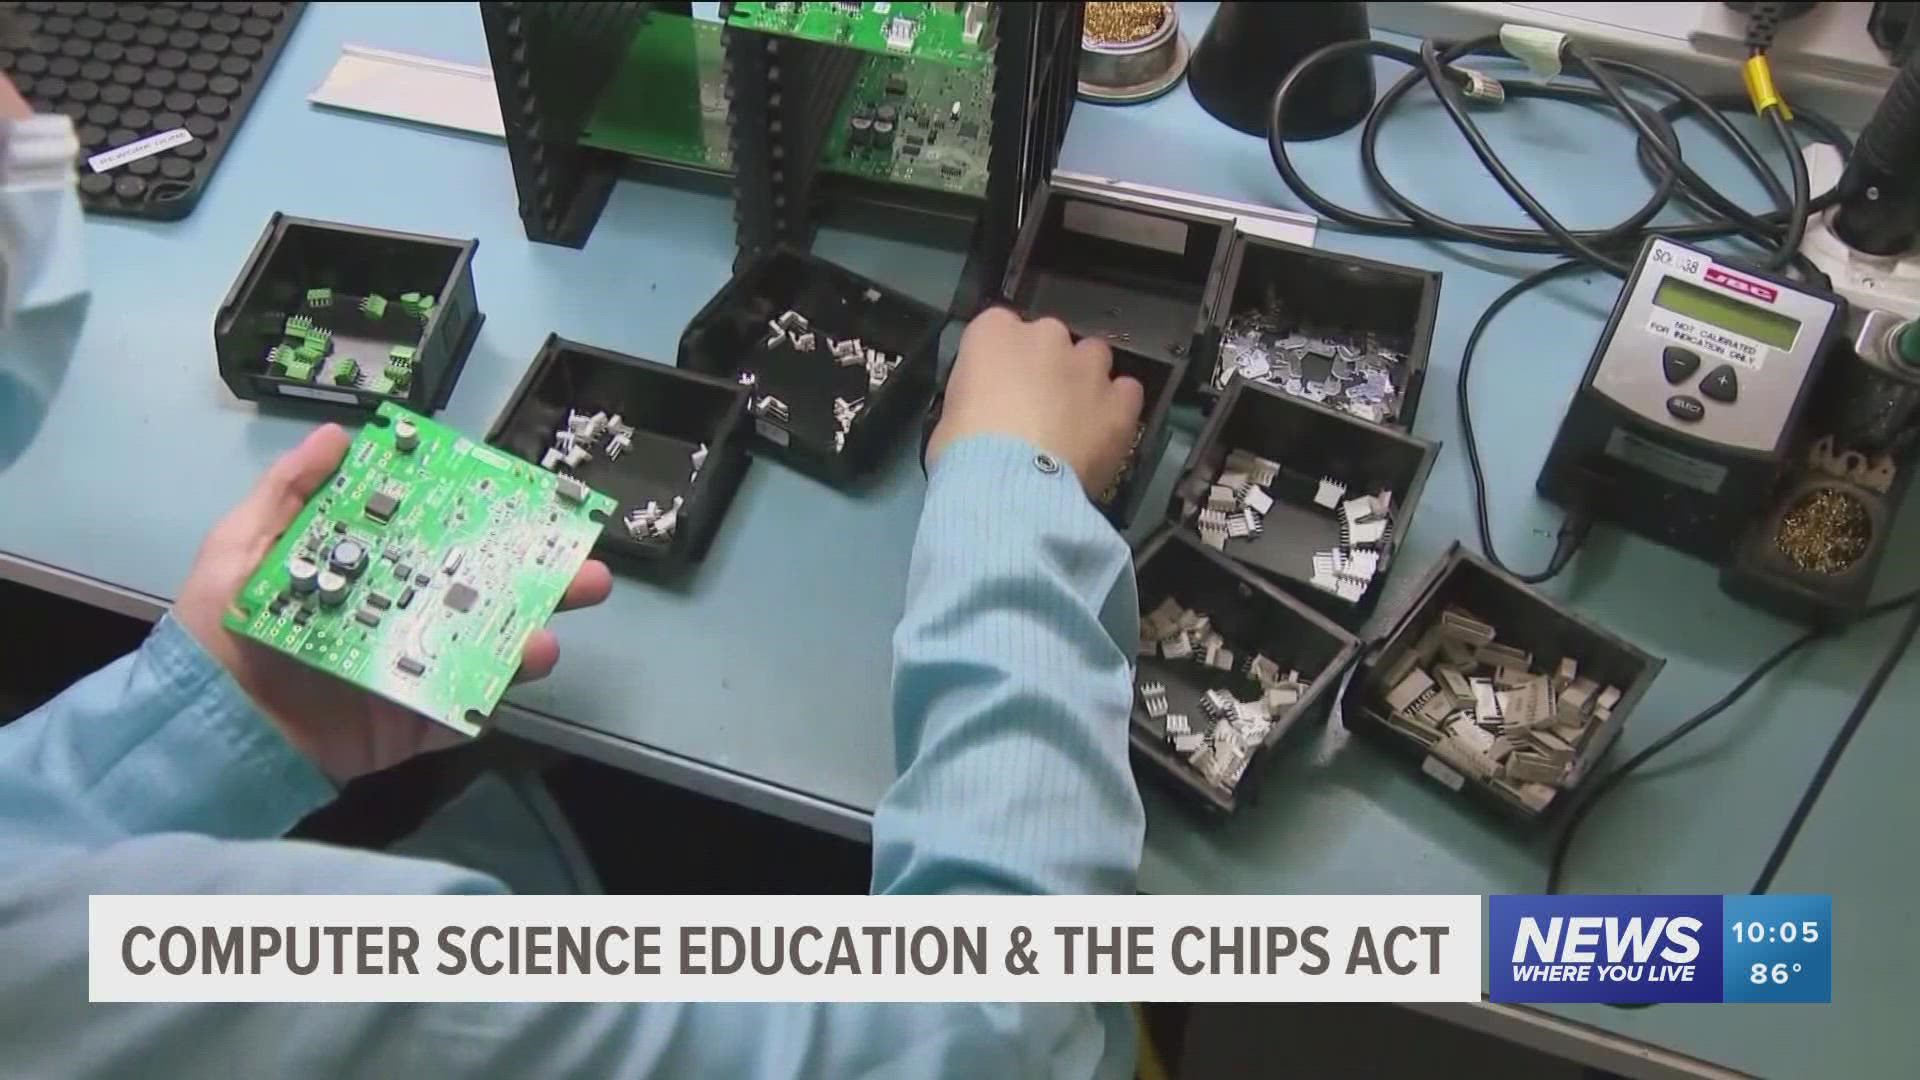 In his weekly address, Governor Asa Hutchinson reviewed his time as chair of the National Governors Association, where he prioritized computer science education.